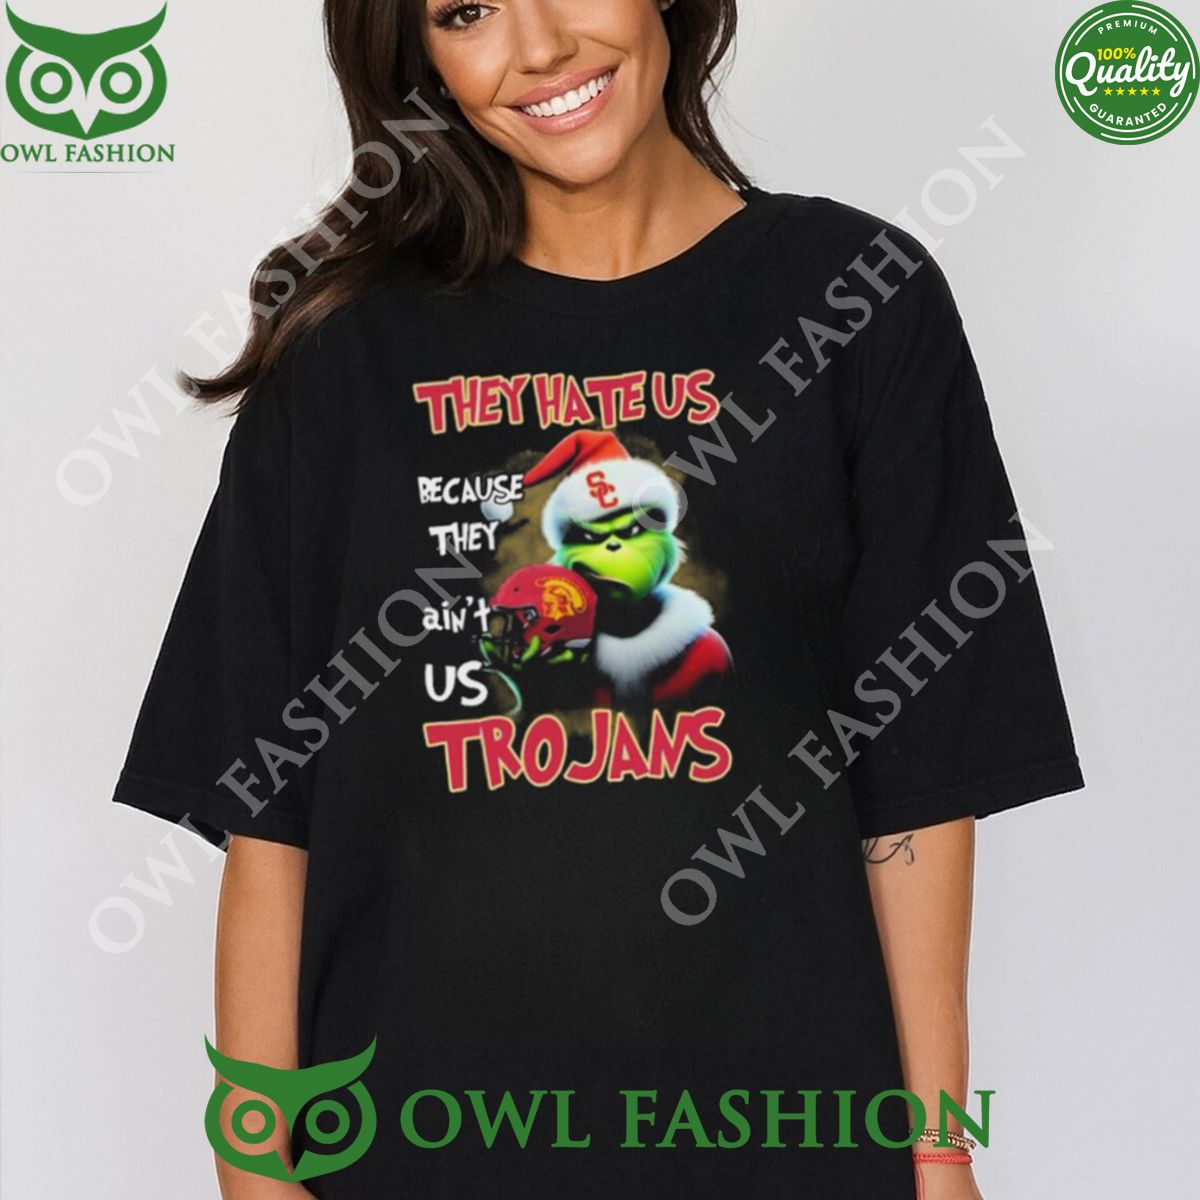 They Hate Us Because Ain’t Us USC Santa Grinch Christmas Trojans t Shirt